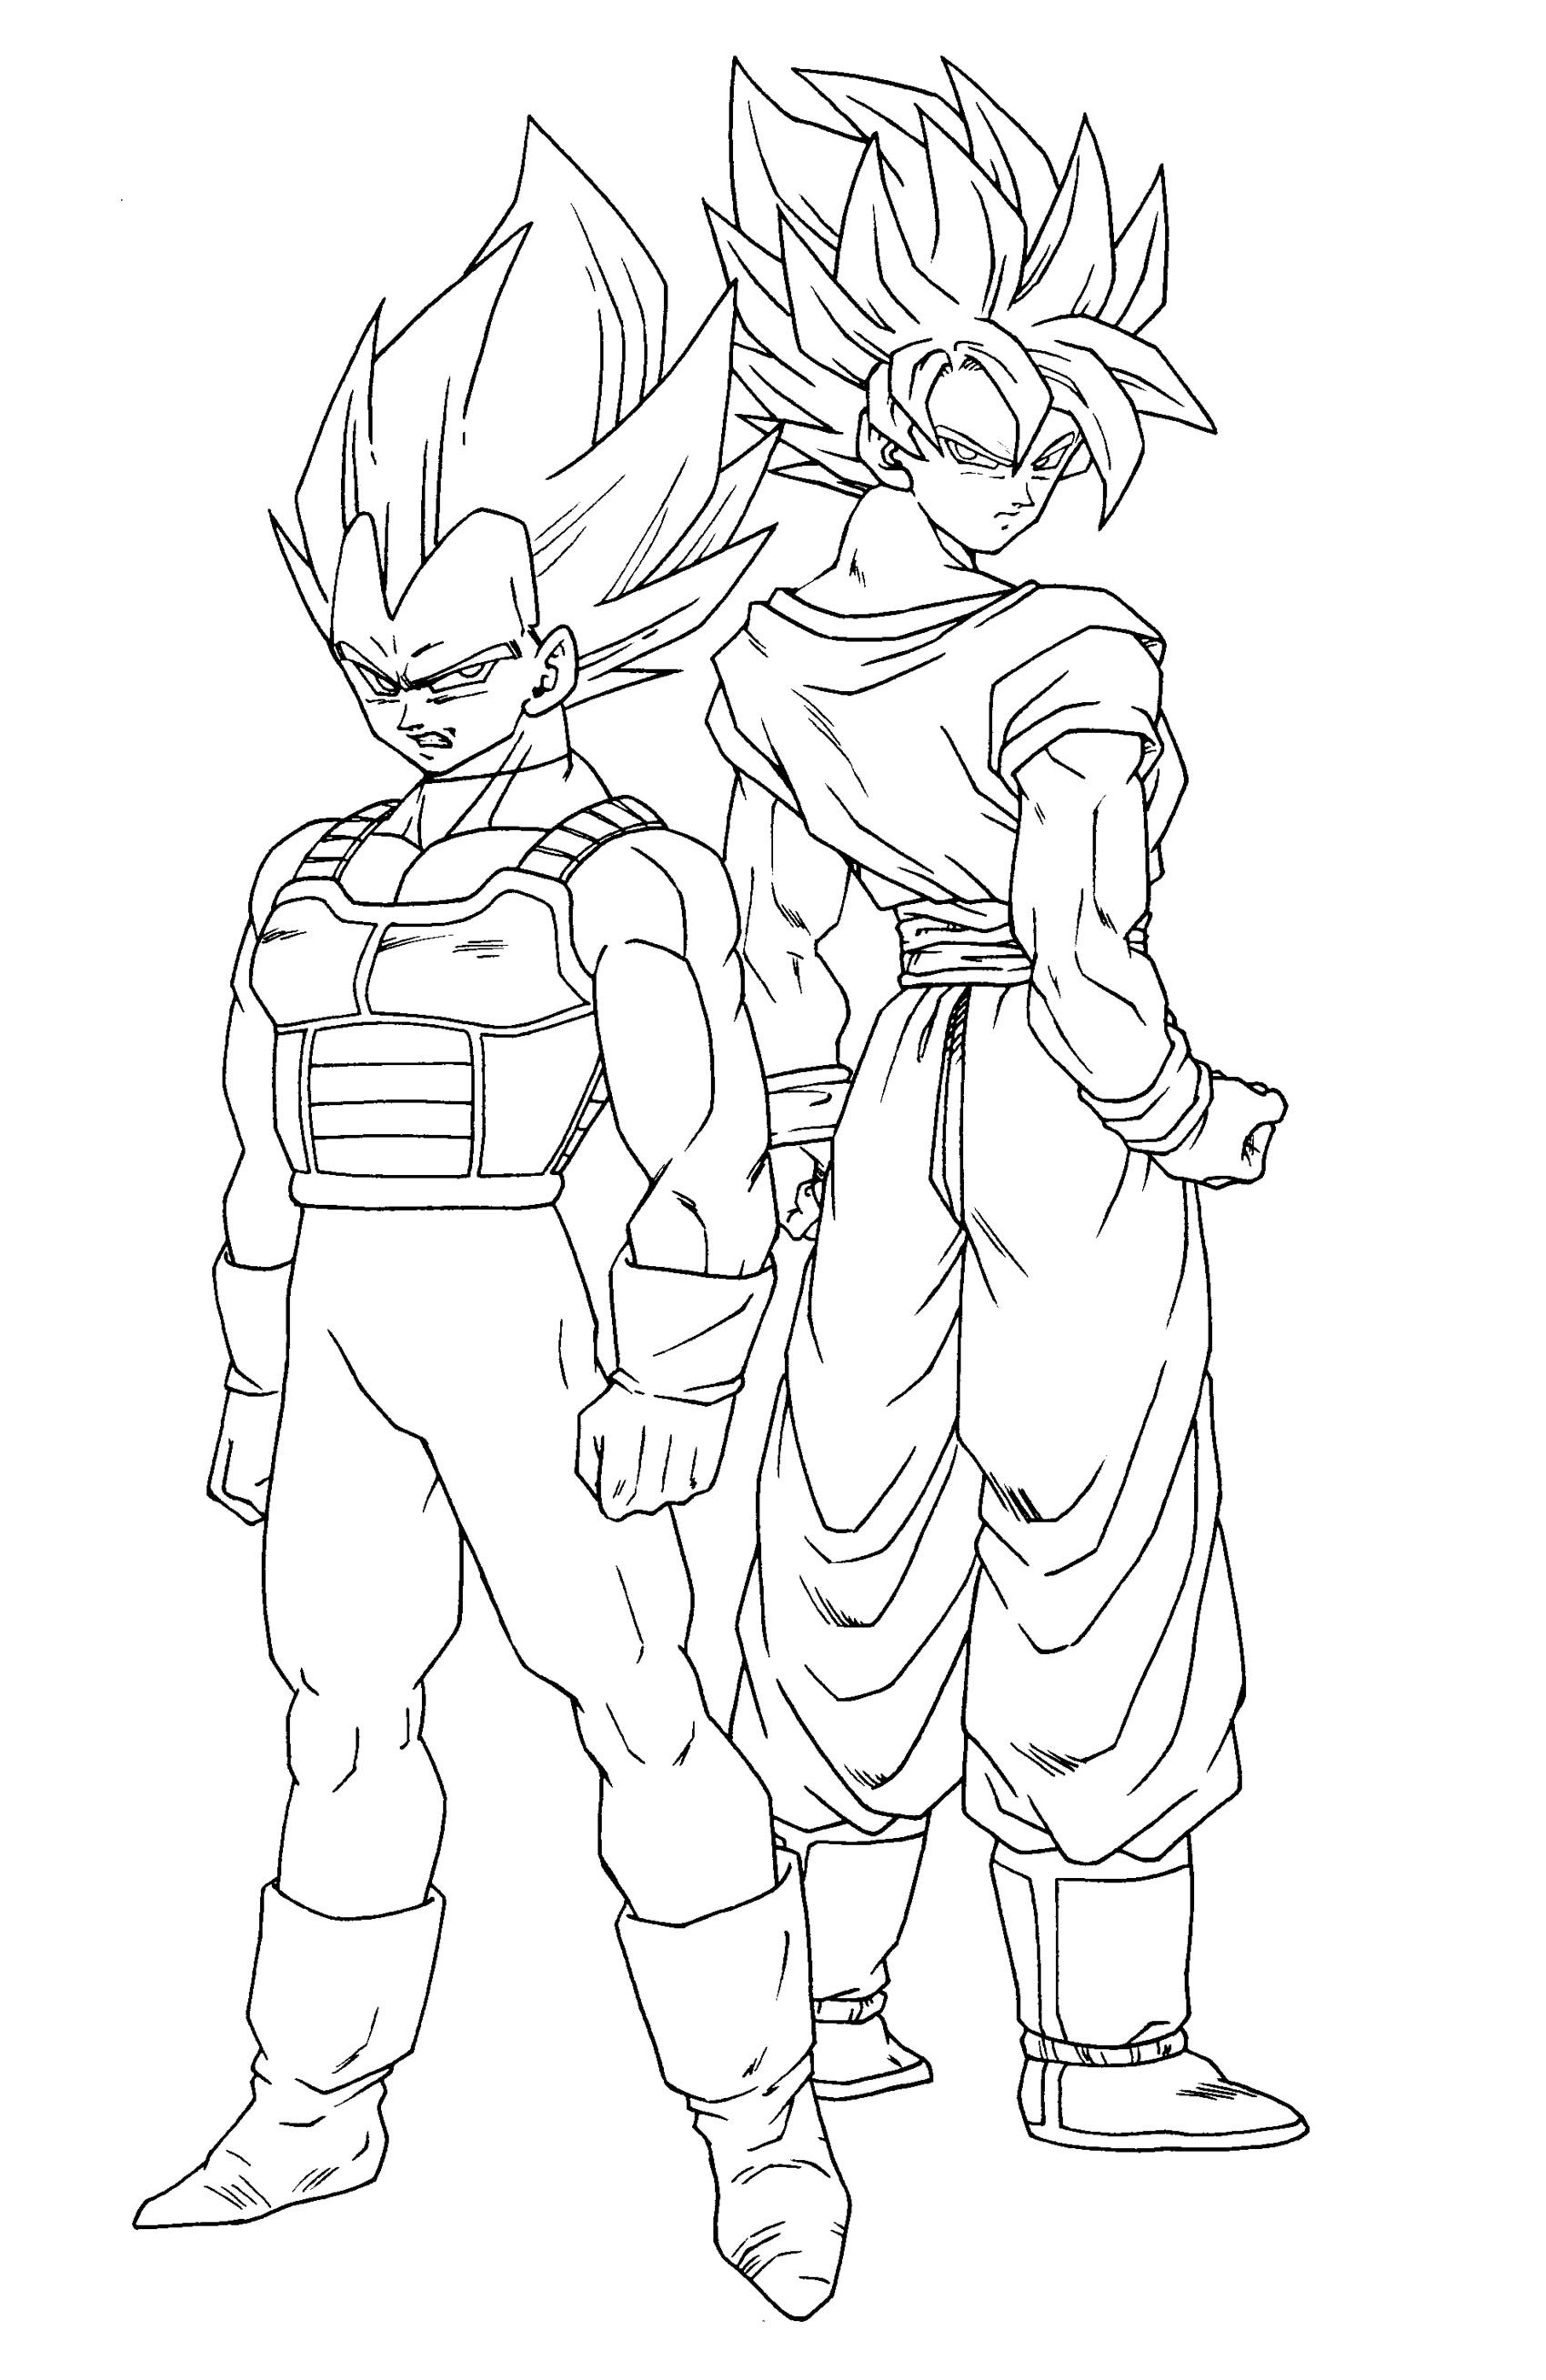 Download Dragon Ball Z #38548 (Cartoons) - Printable coloring pages